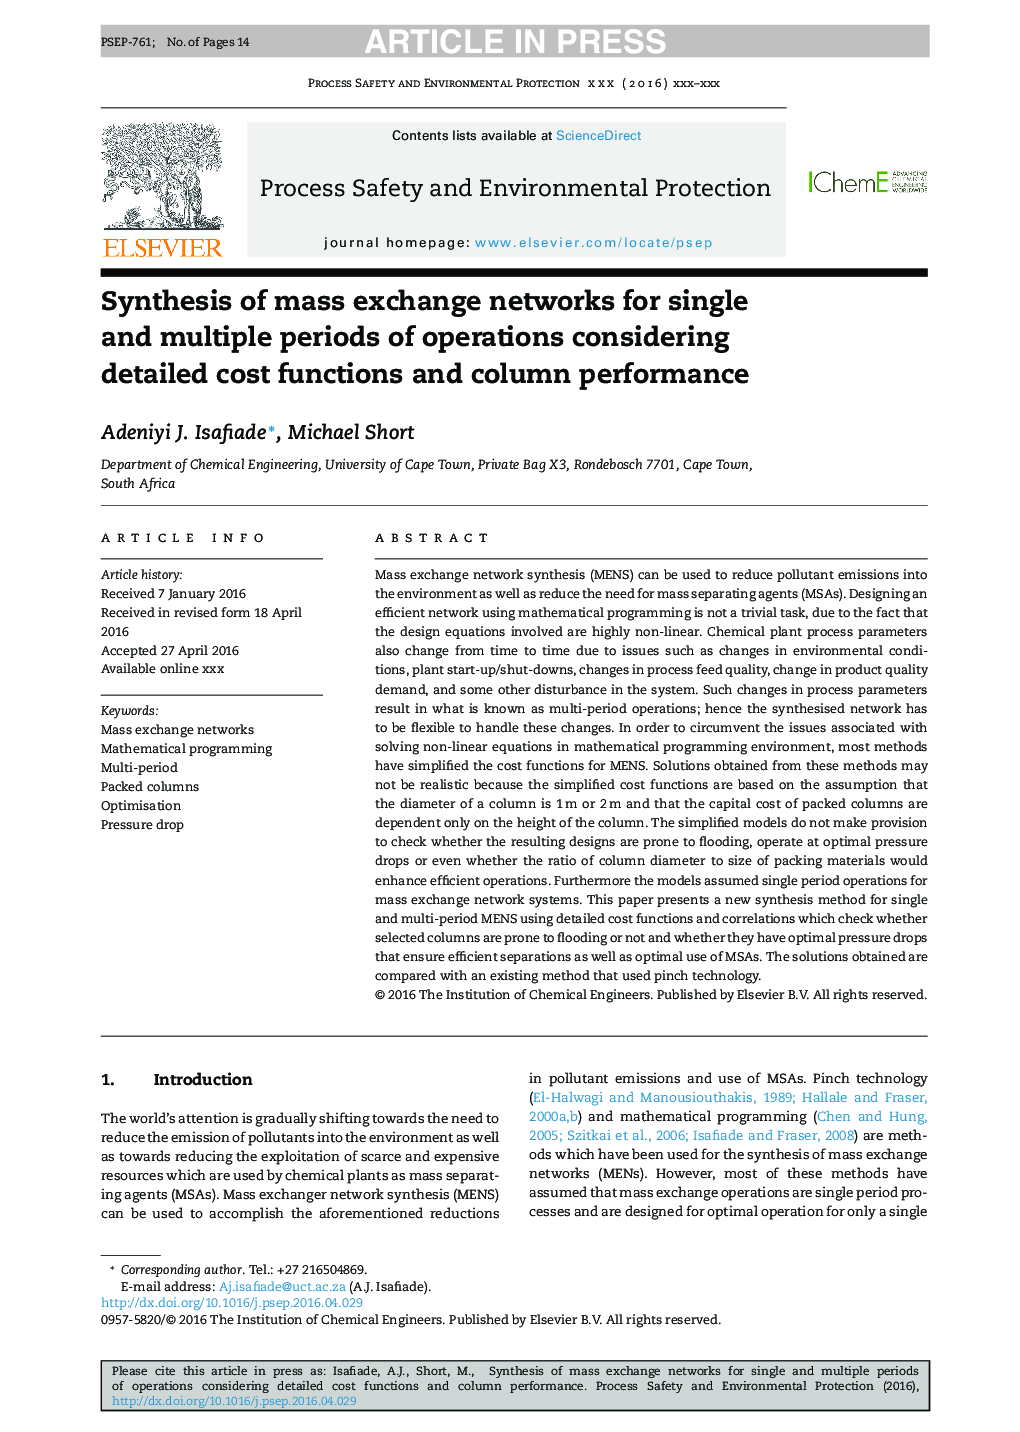 Synthesis of mass exchange networks for single and multiple periods of operations considering detailed cost functions and column performance